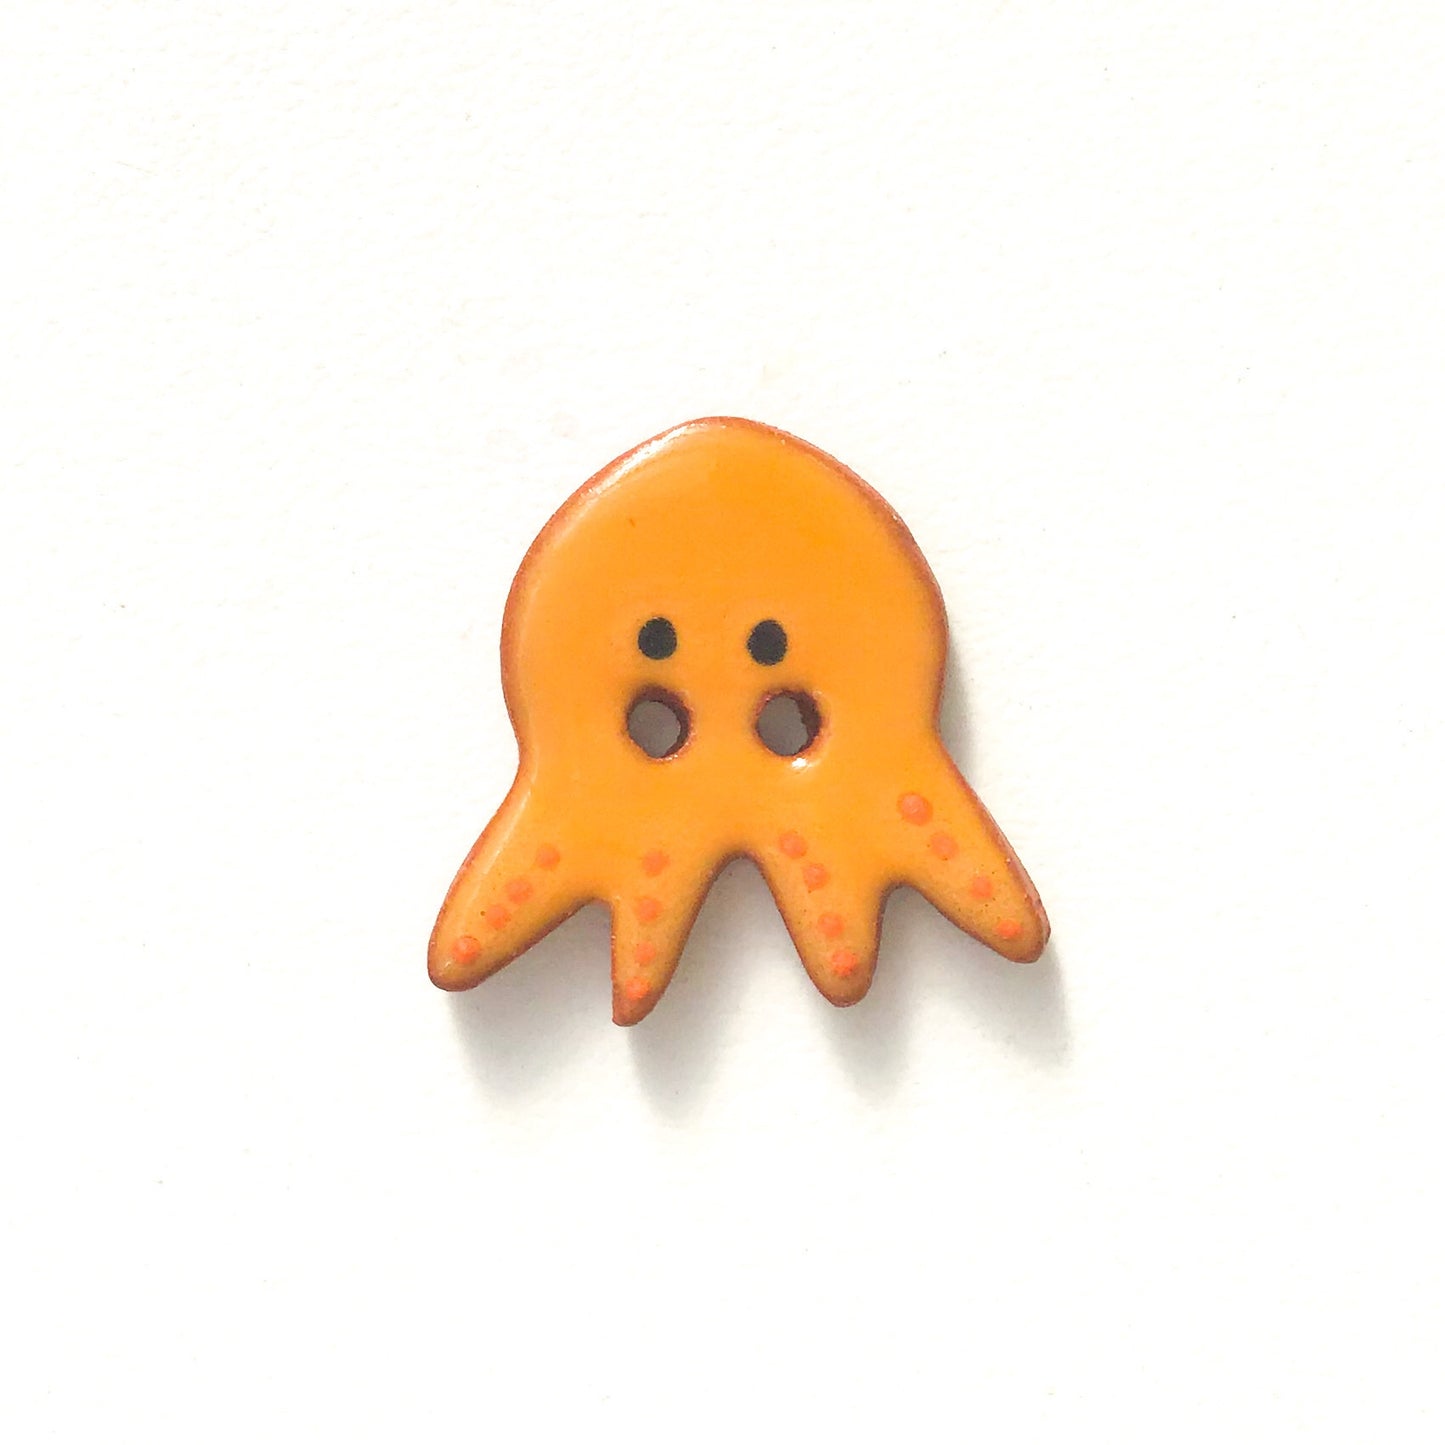 'Earth Tones' Octopus Buttons - Ceramic Ceramic Buttons -Children's Animal Buttons (ws-1)